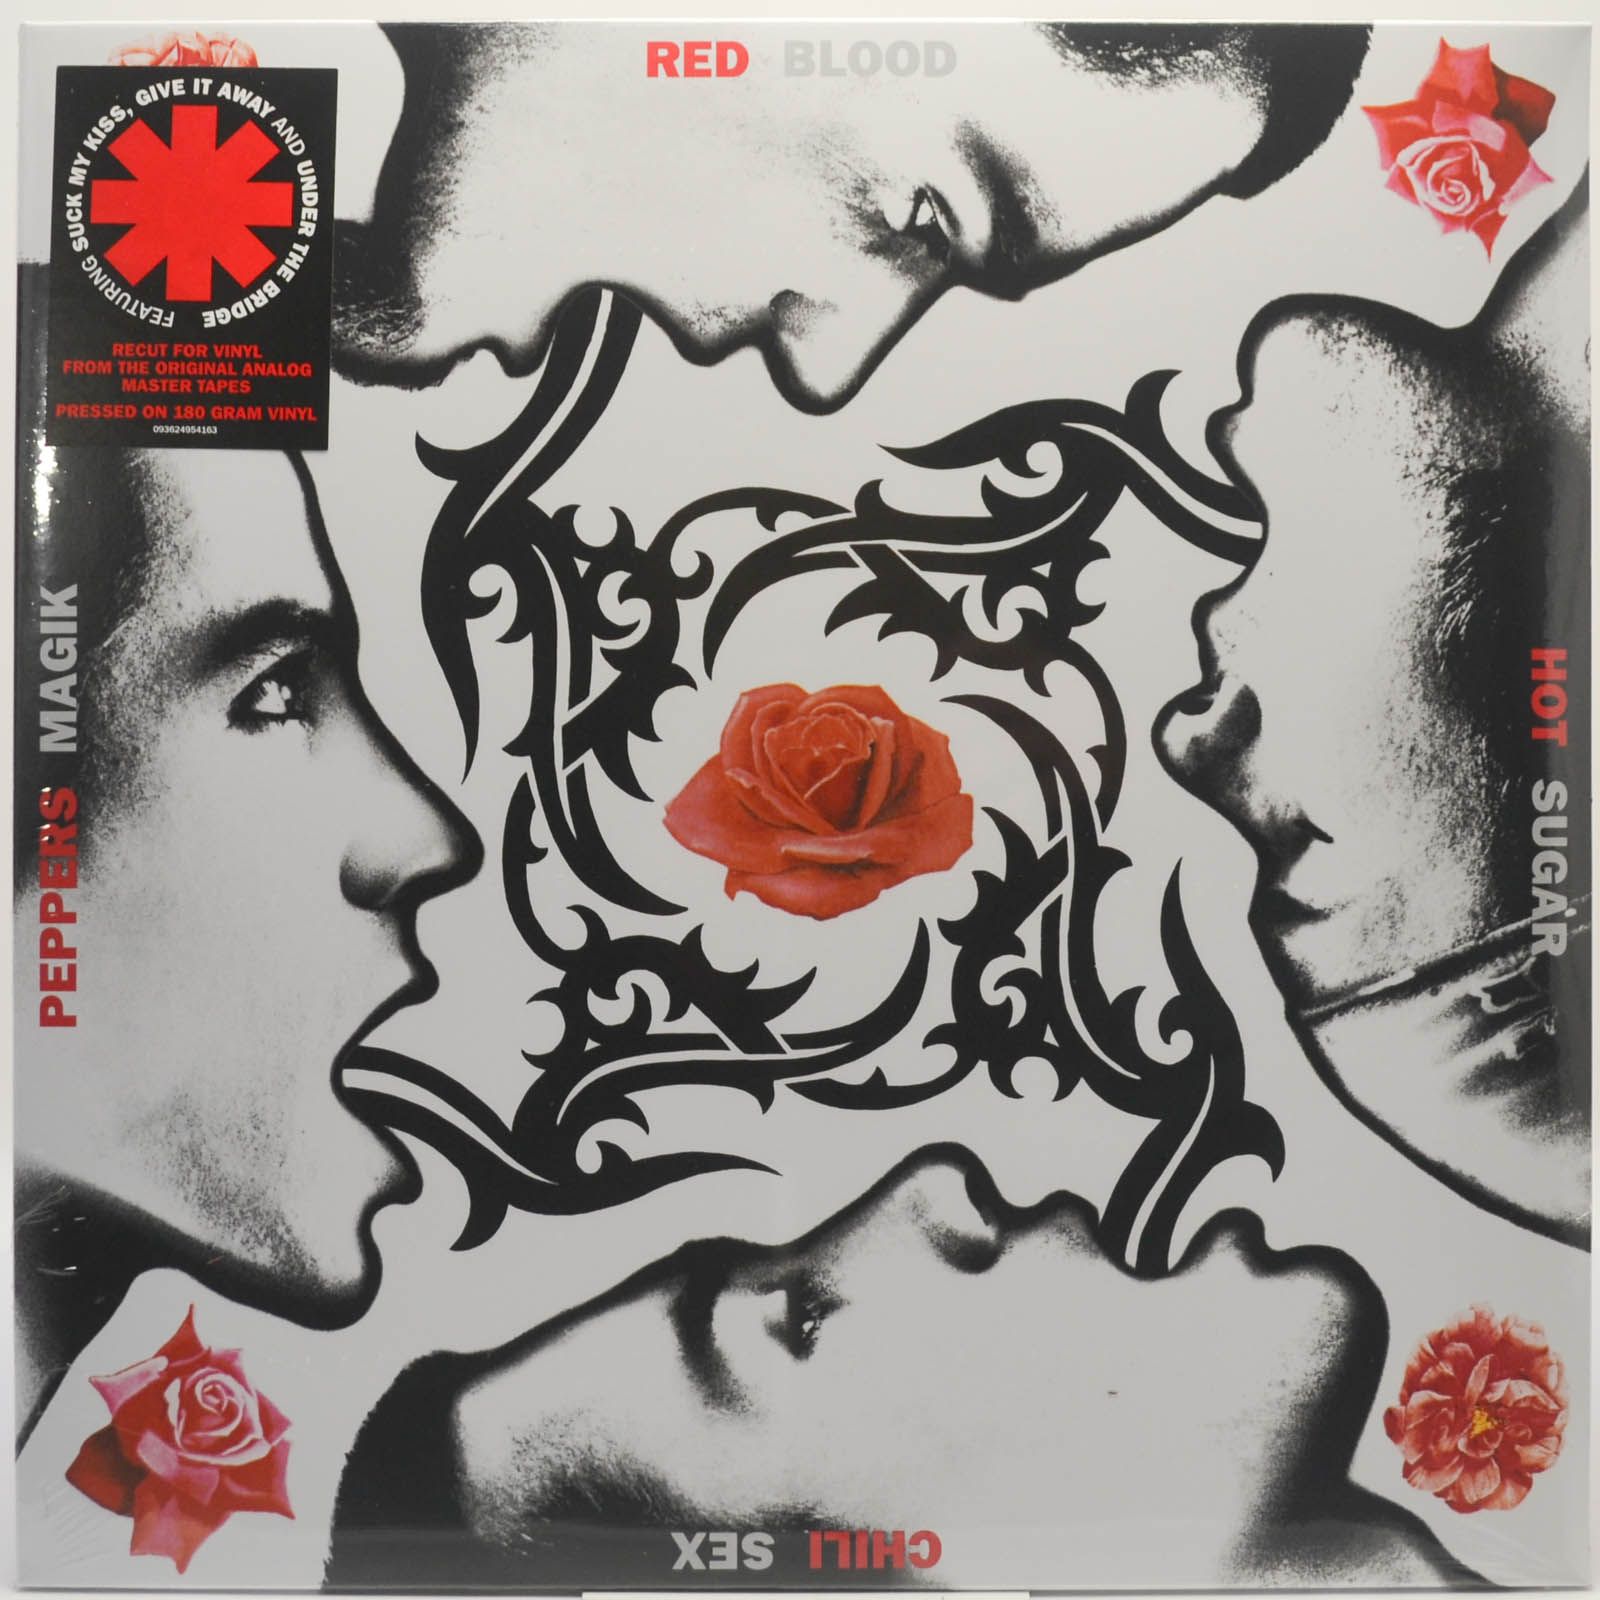 Red Hot Chili Peppers — Blood Sugar Sex Magik (2LP), 1991